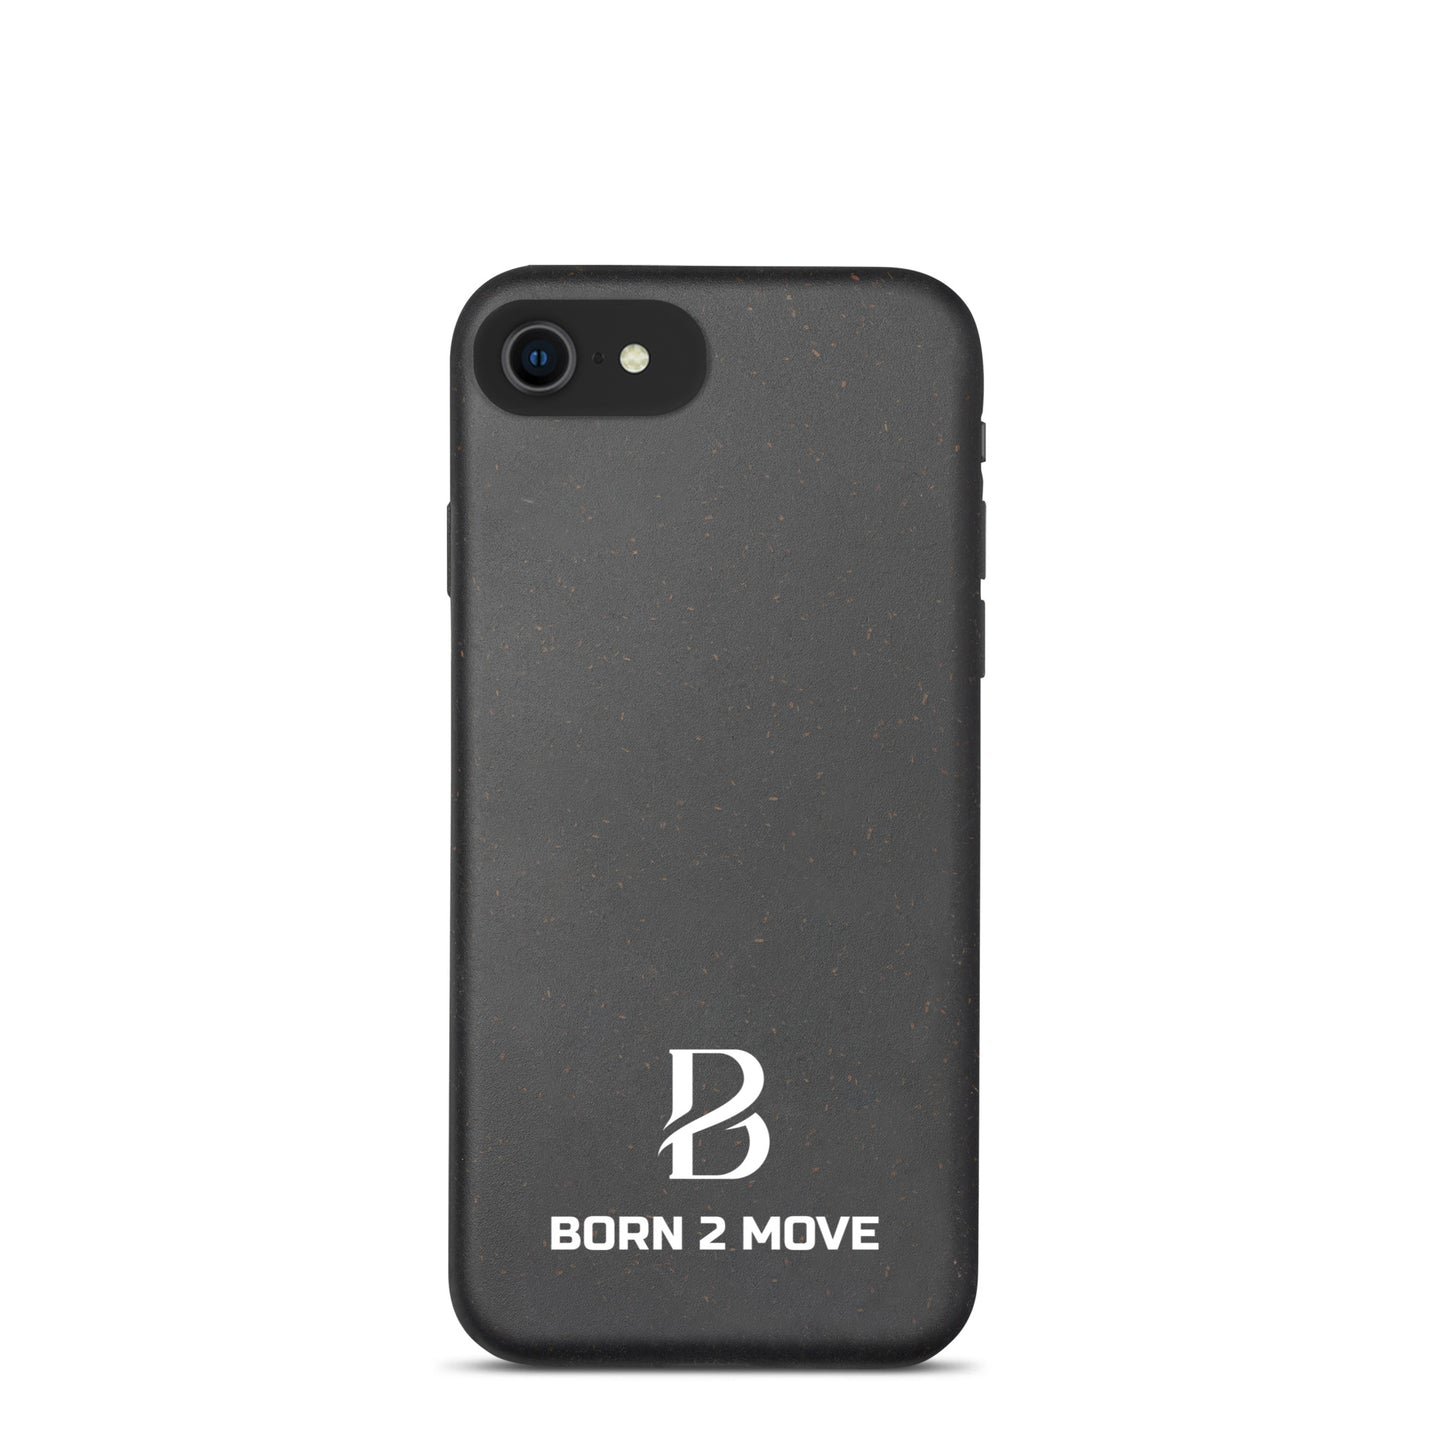 White Logo "Norn 2 Move" Speckled iPhone Case